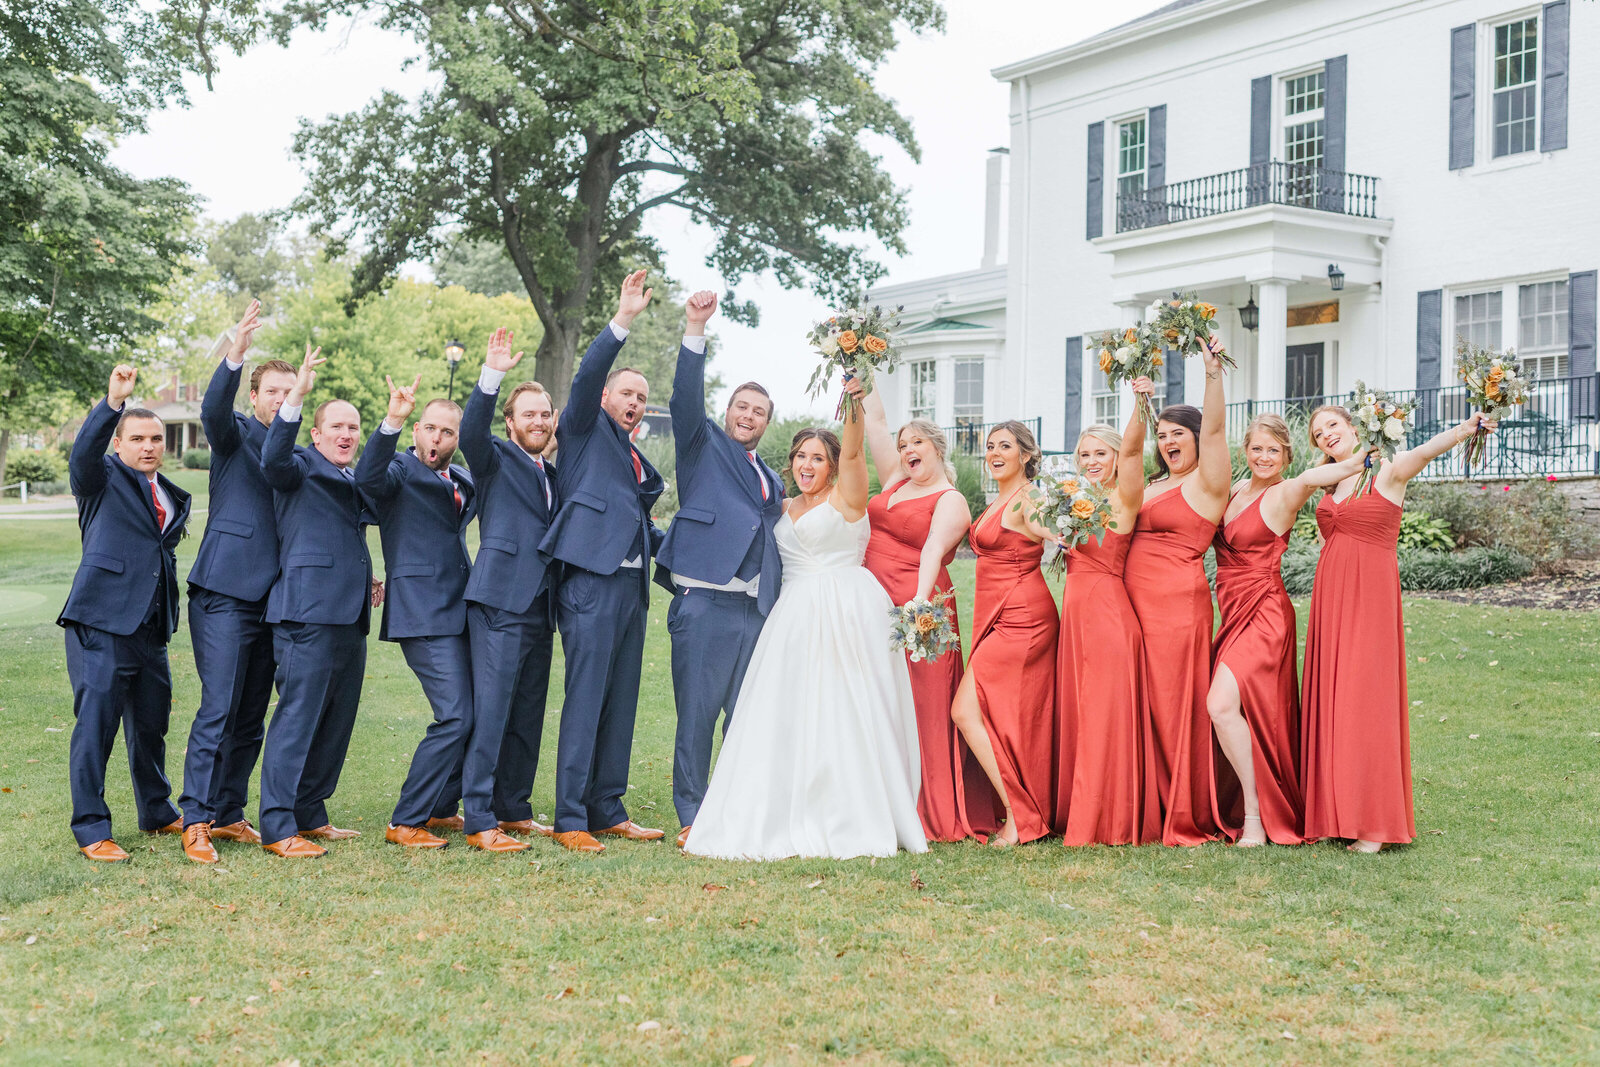 Bride and groom pose with their bridal party at their wedding and cheer with excitement. The bridesmaids are in orange and groomsmen in blue.